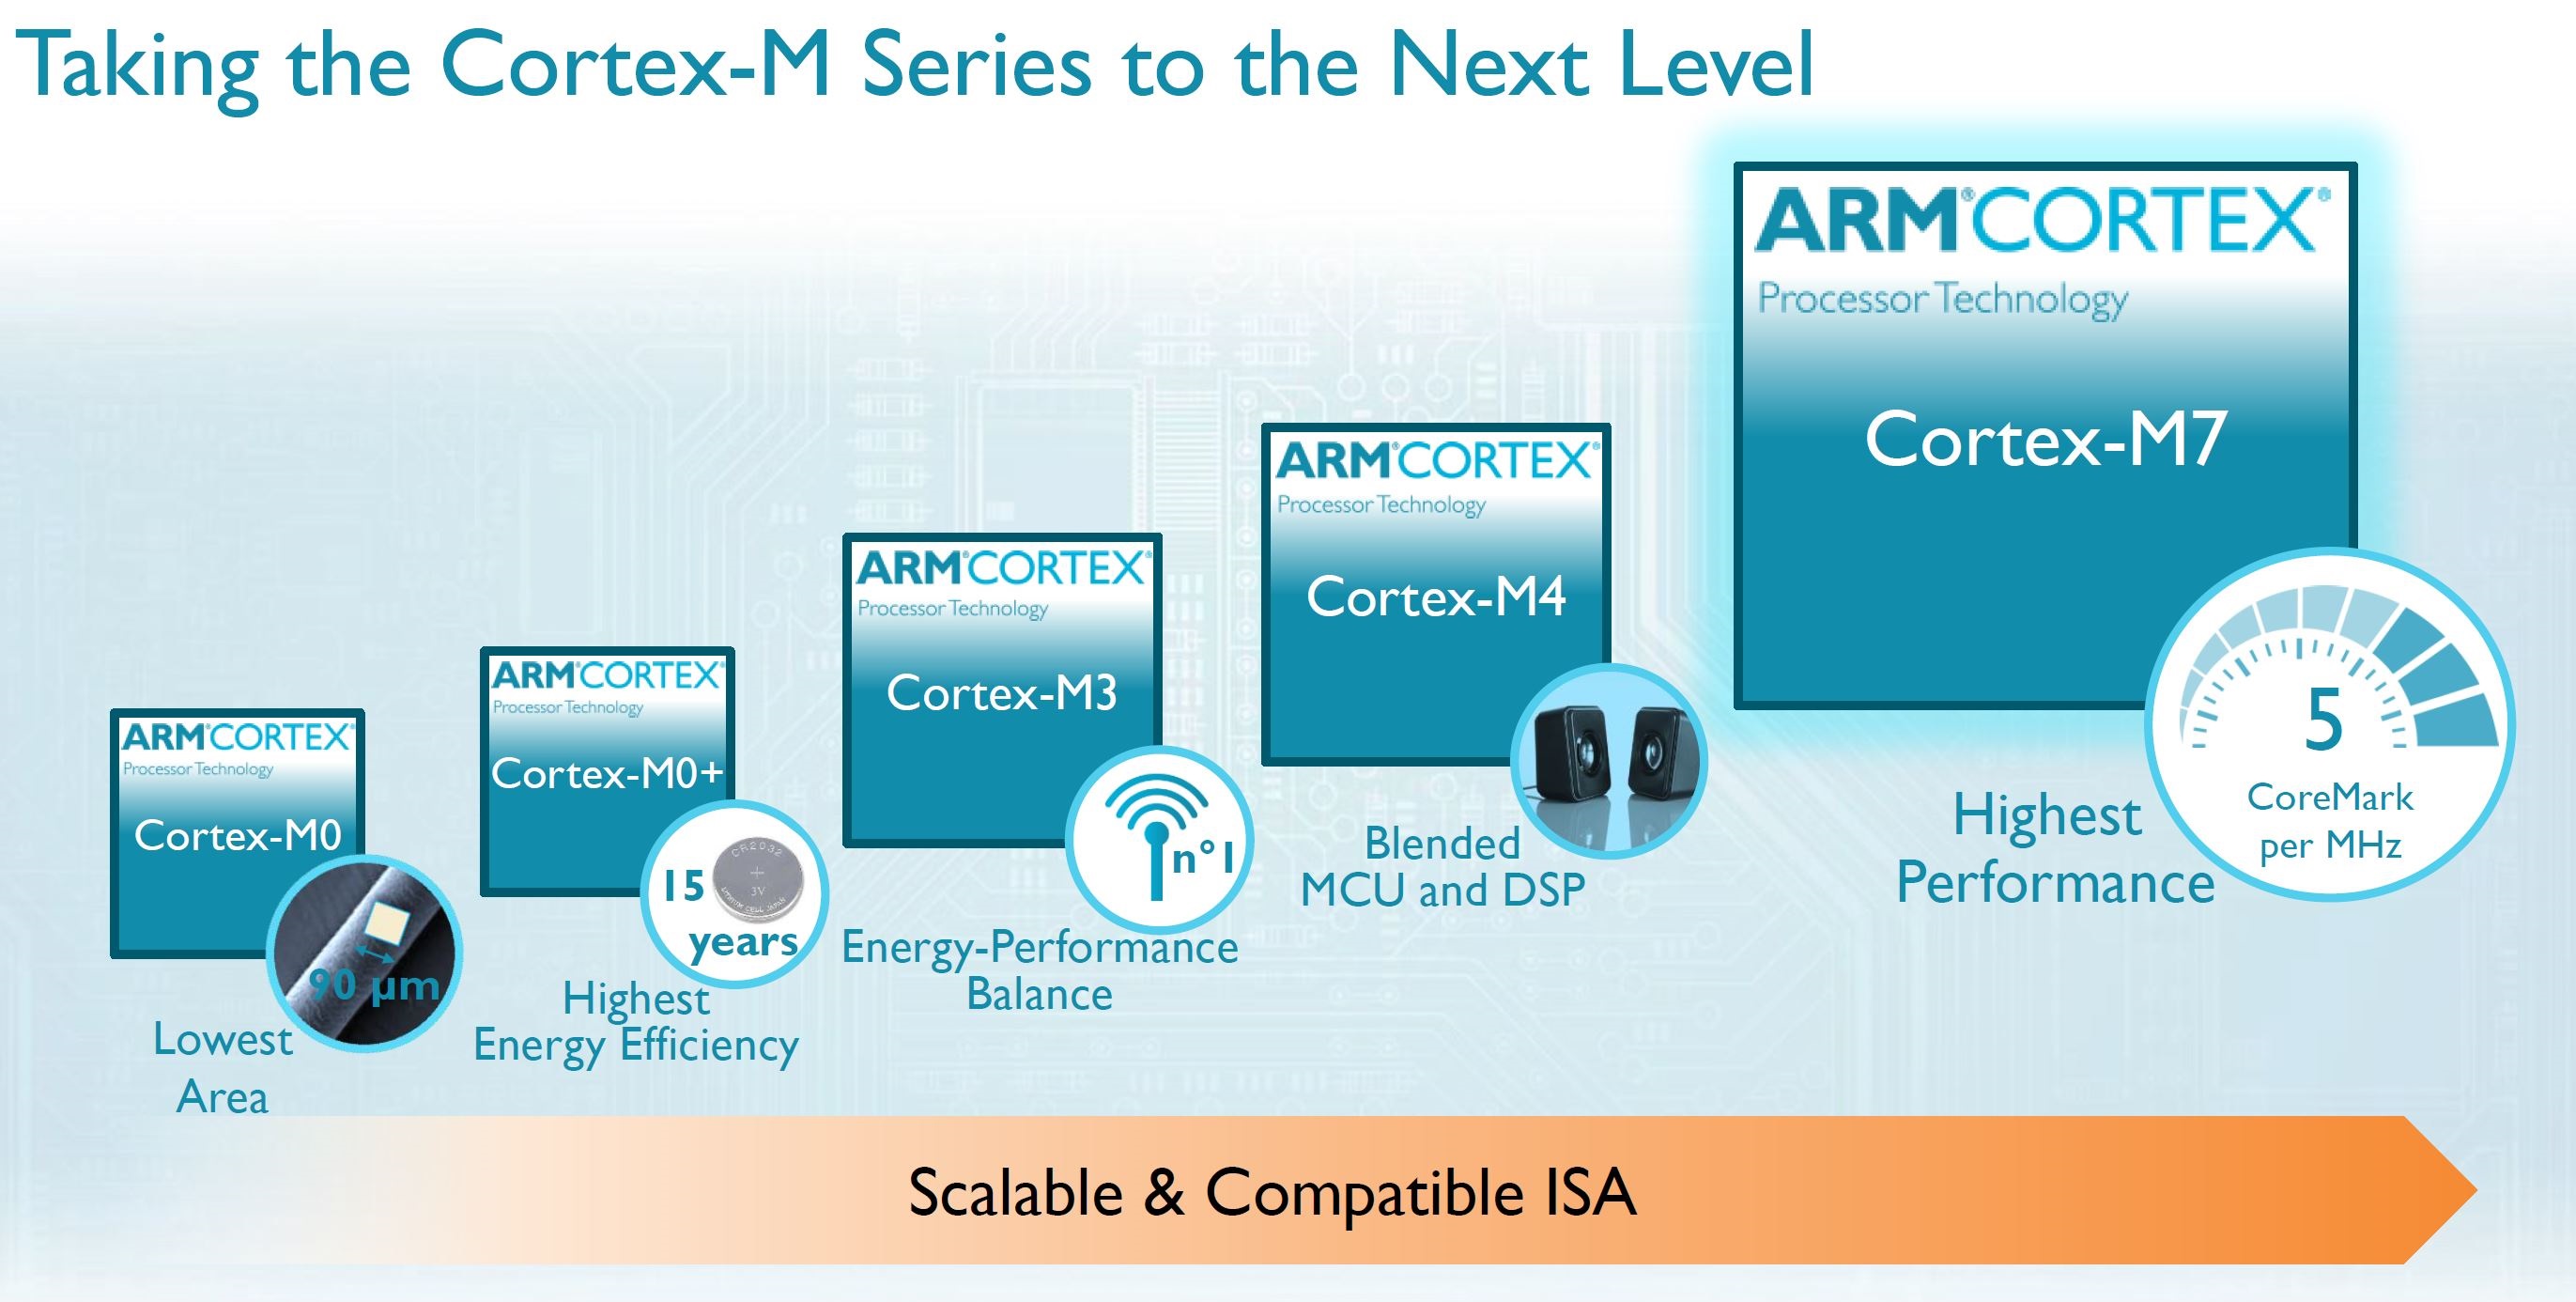 The Cortex M7 CPU - Cortex-M7 Launches: Embedded, IoT and Wearables